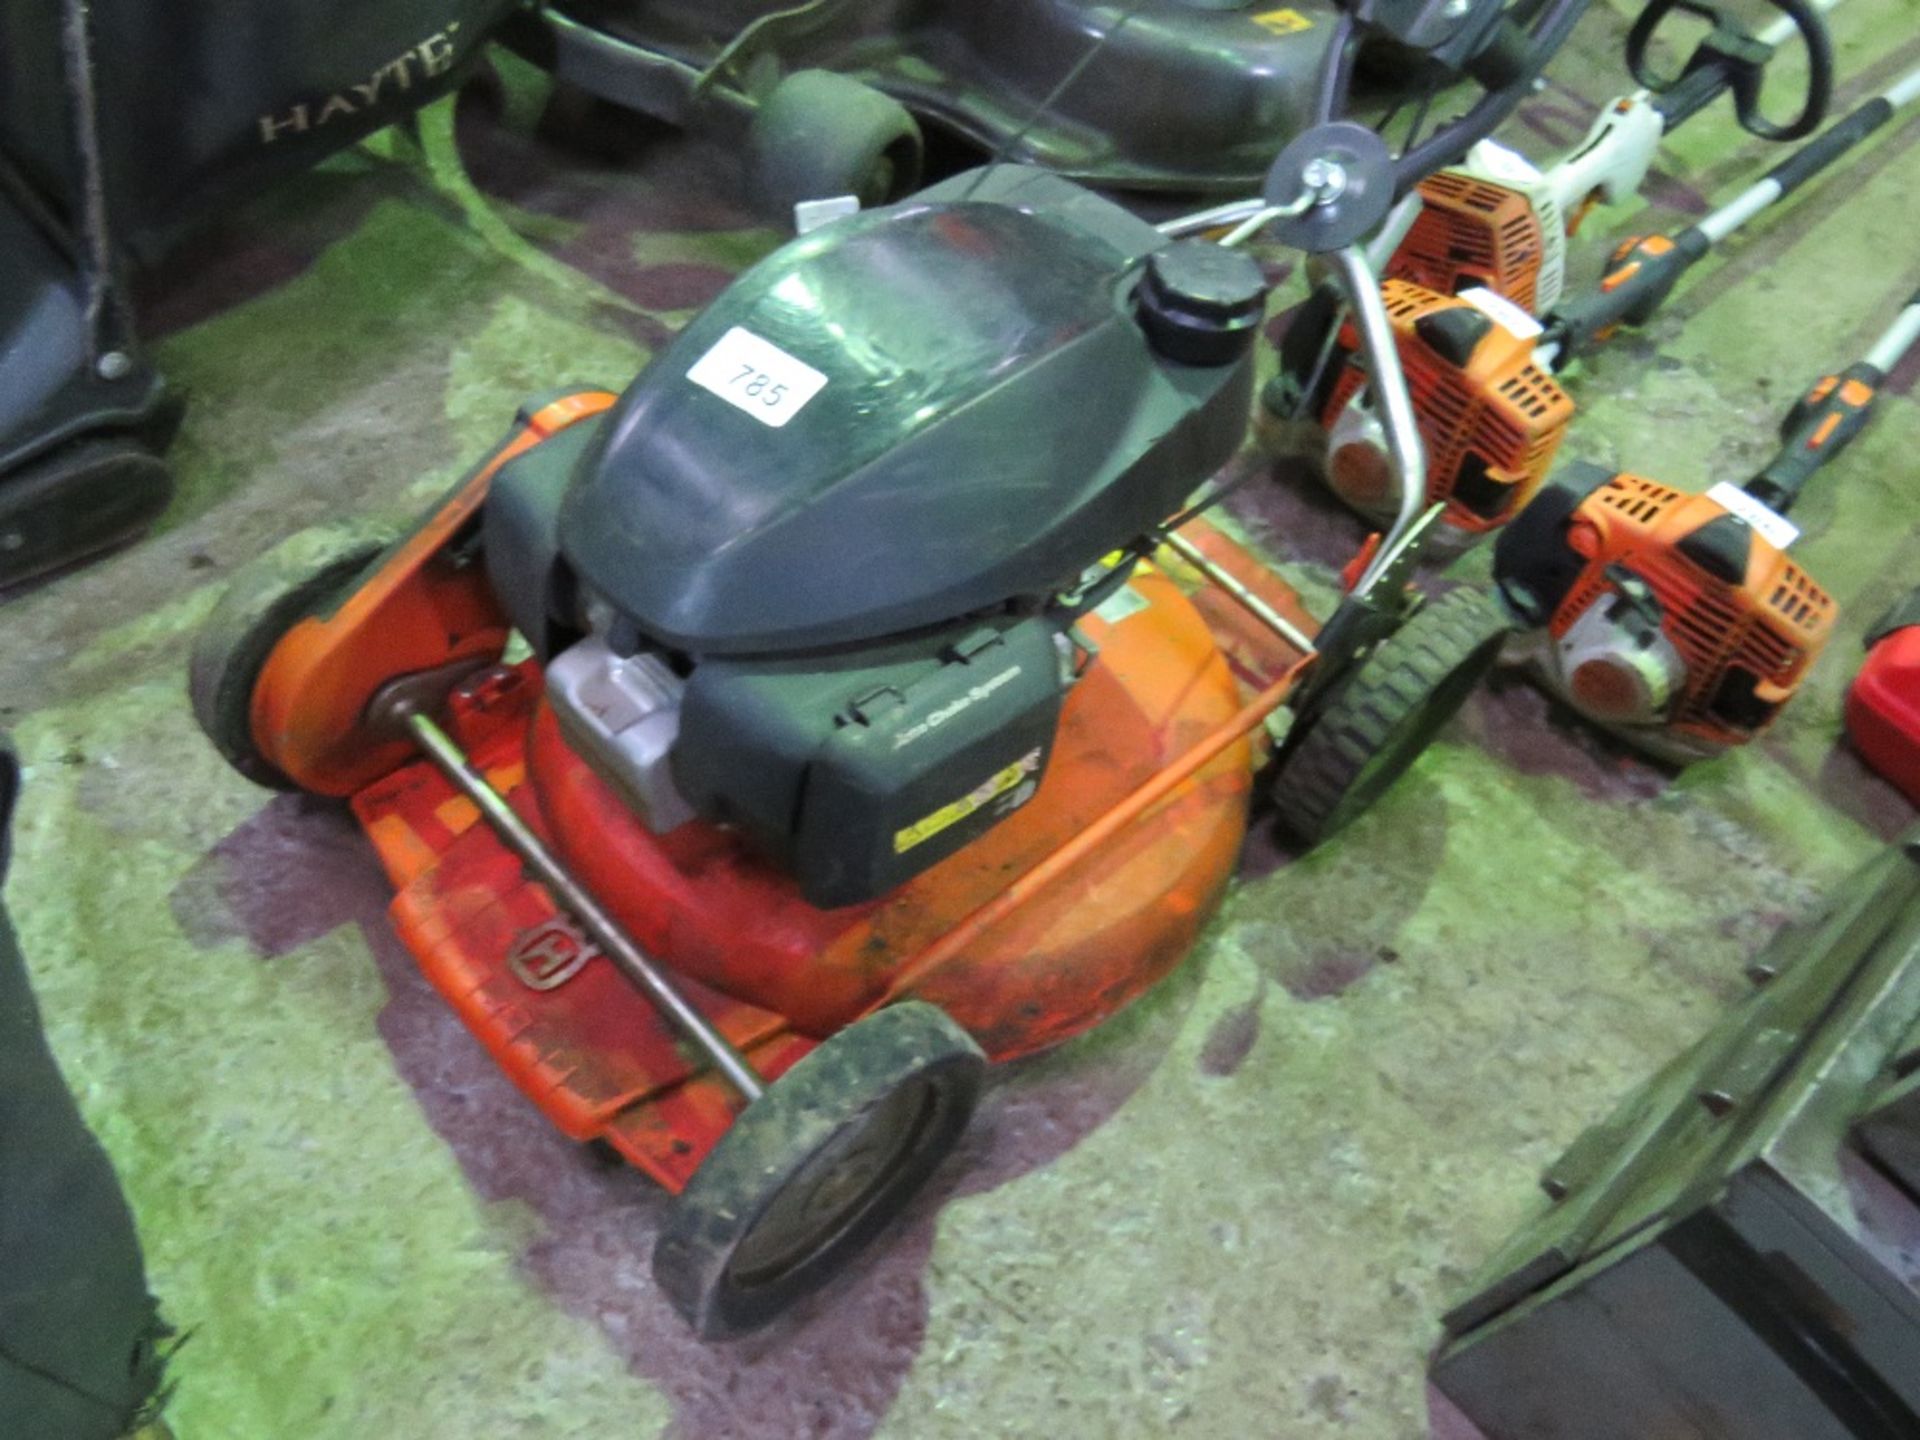 HUSQVARNA PROFESSIONAL MOWER. DIRECT FROM LANDSCAPE MAINTENANCE COMPANY DUE TO DEPOT CLOSURE.